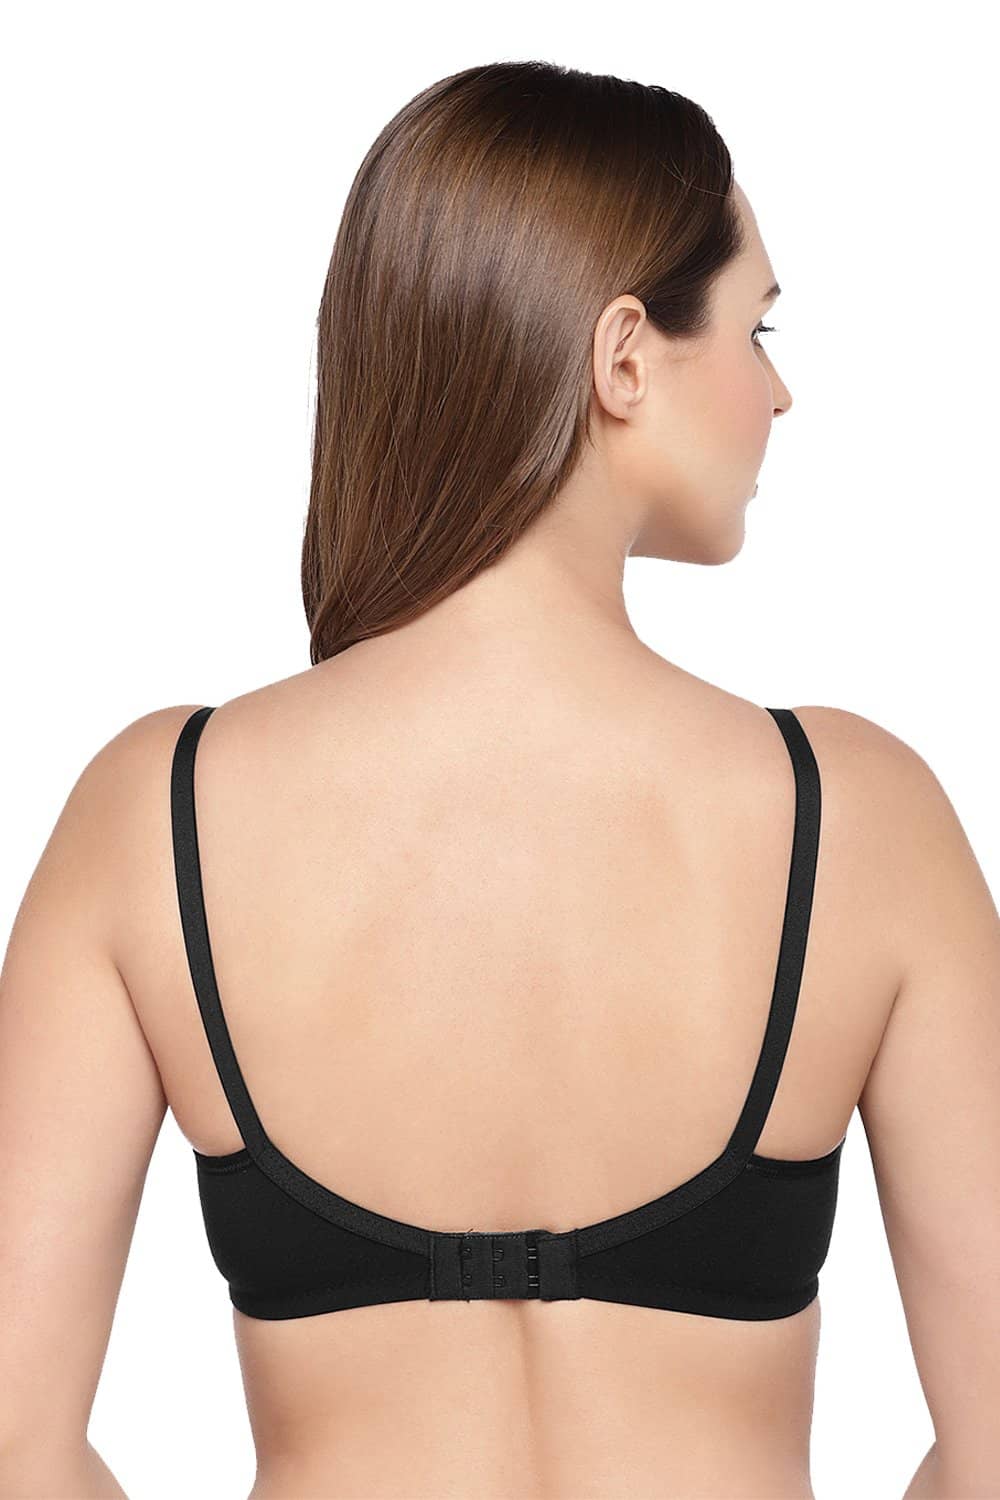 Organic Cotton Antimicrobial Seamless Triangular Bra with Supportive Stitch-ISB099-Black-